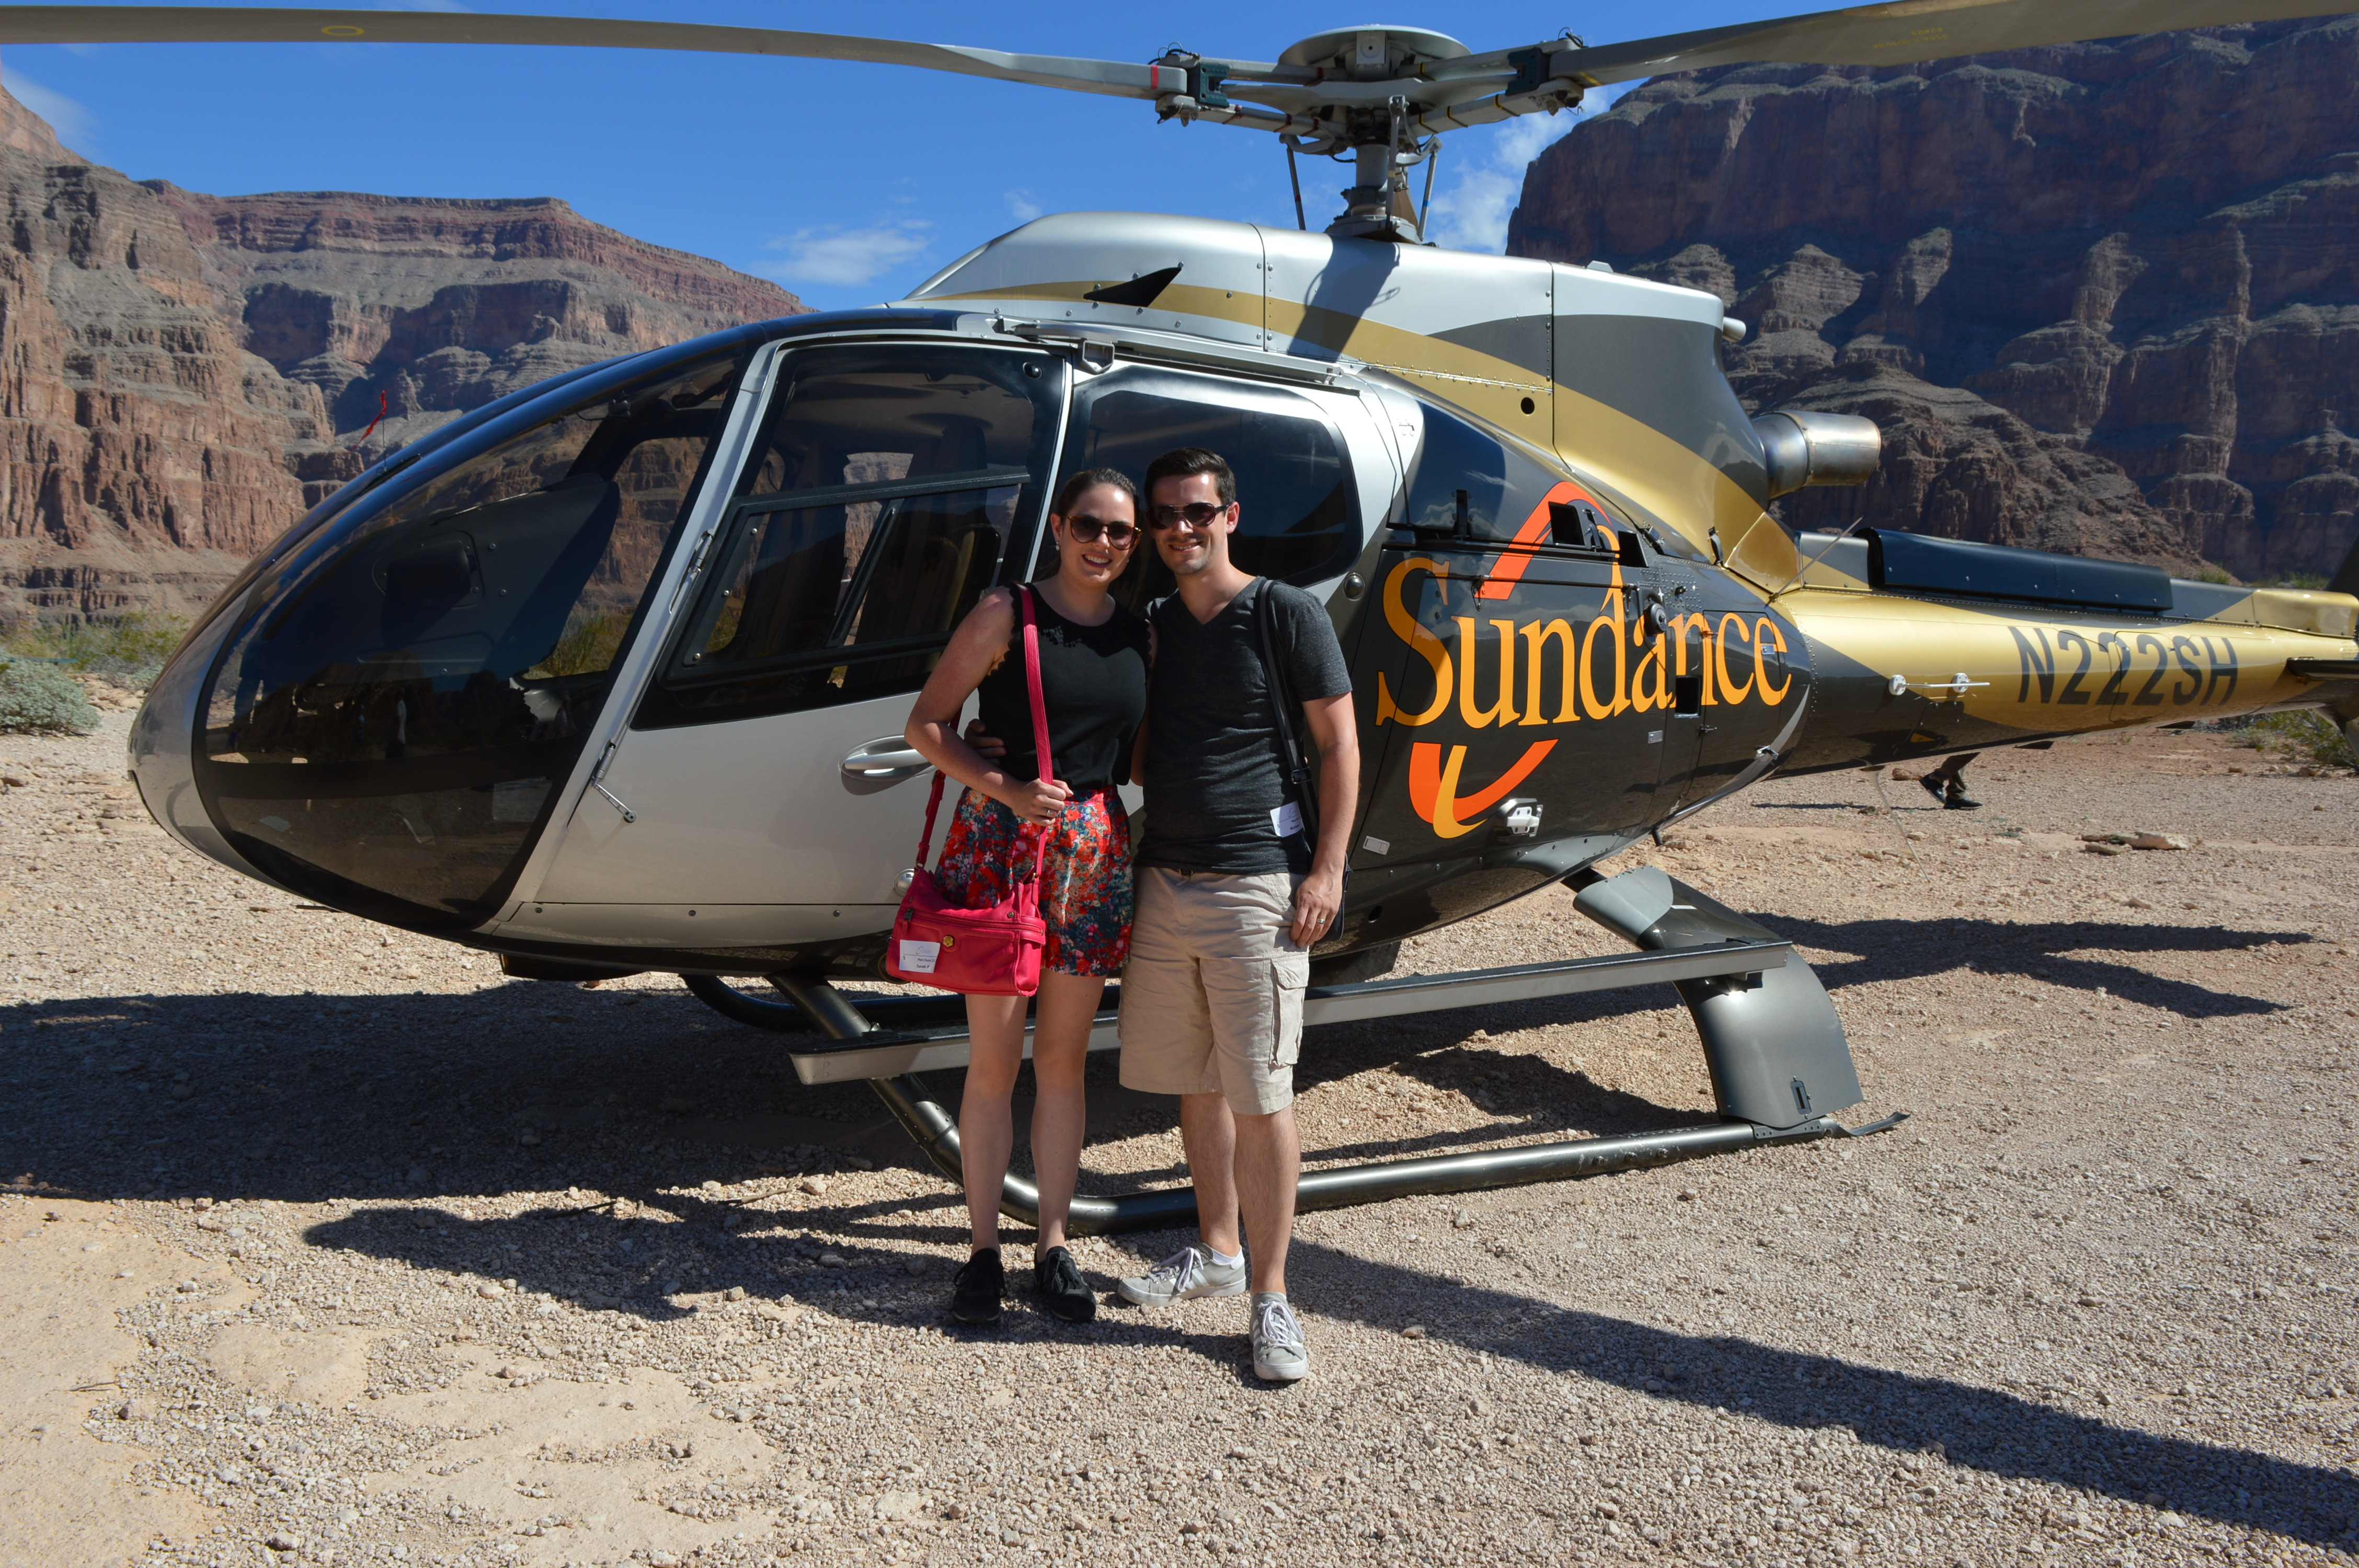 Helicopter landed in the Grand Canyon